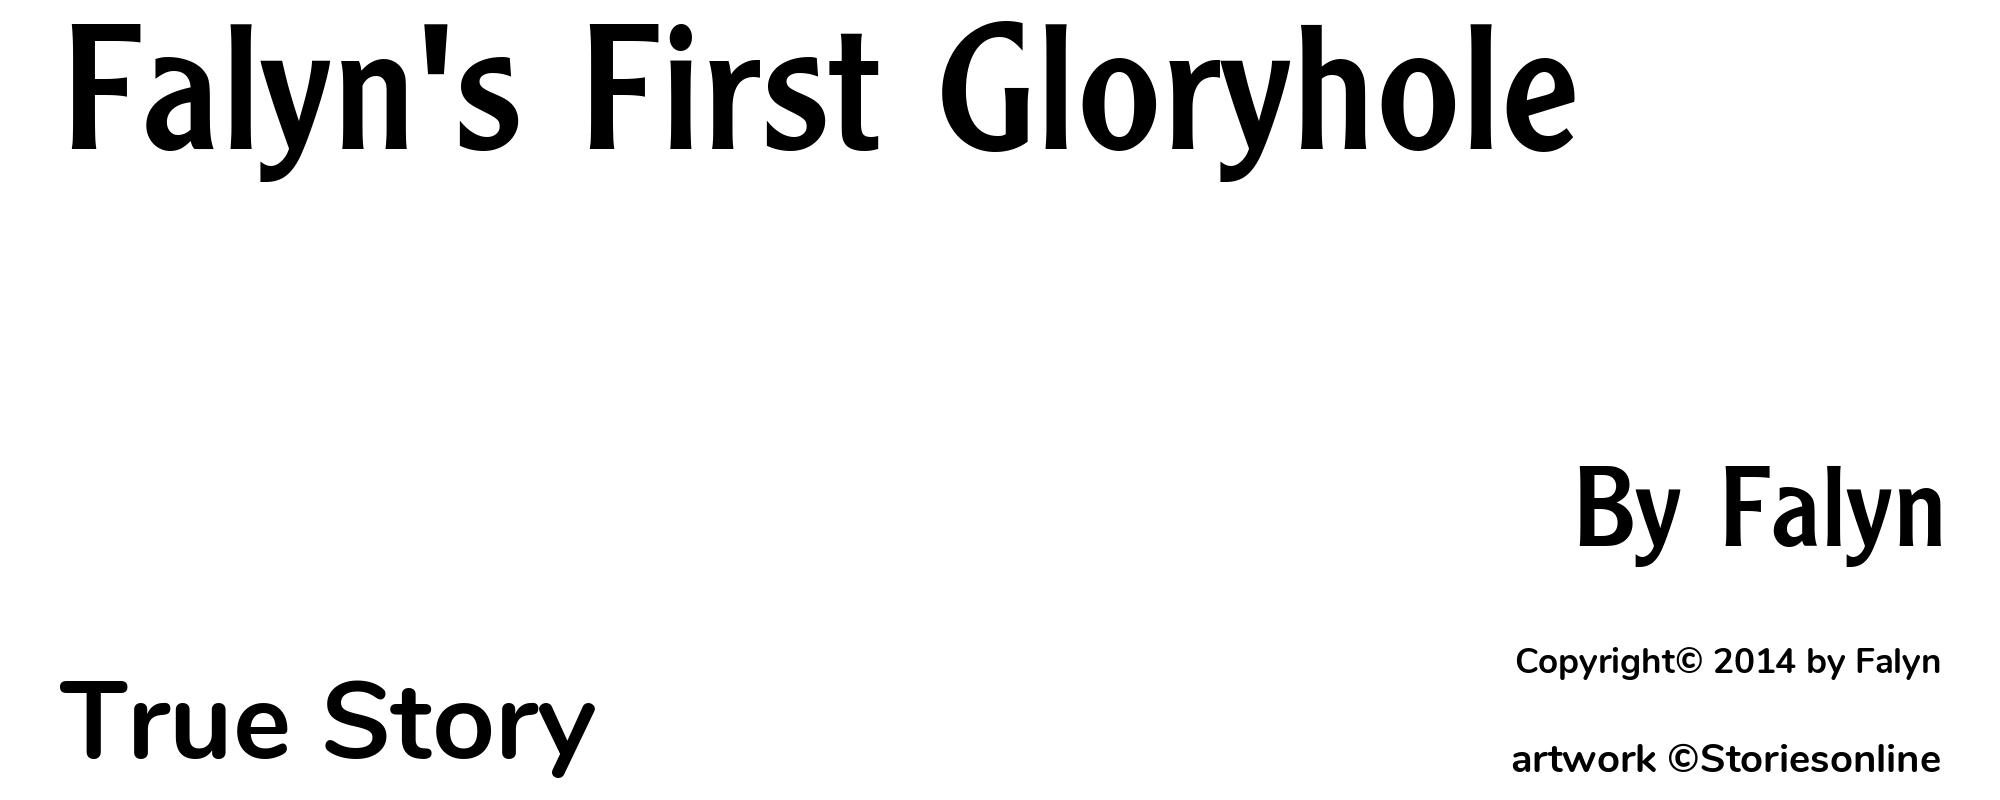 Falyn's First Gloryhole - Cover